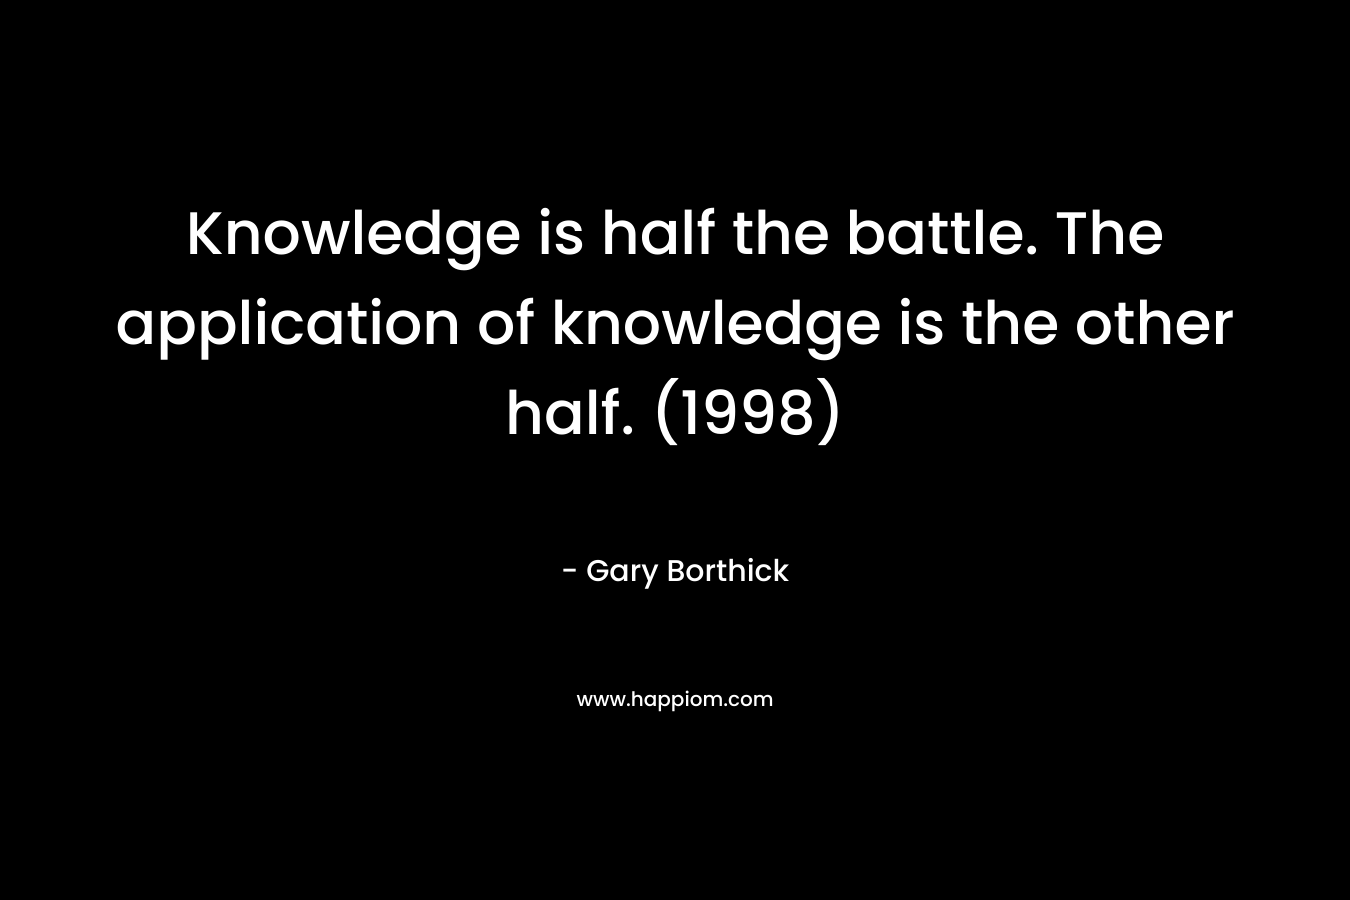 Knowledge is half the battle. The application of knowledge is the other half. (1998)